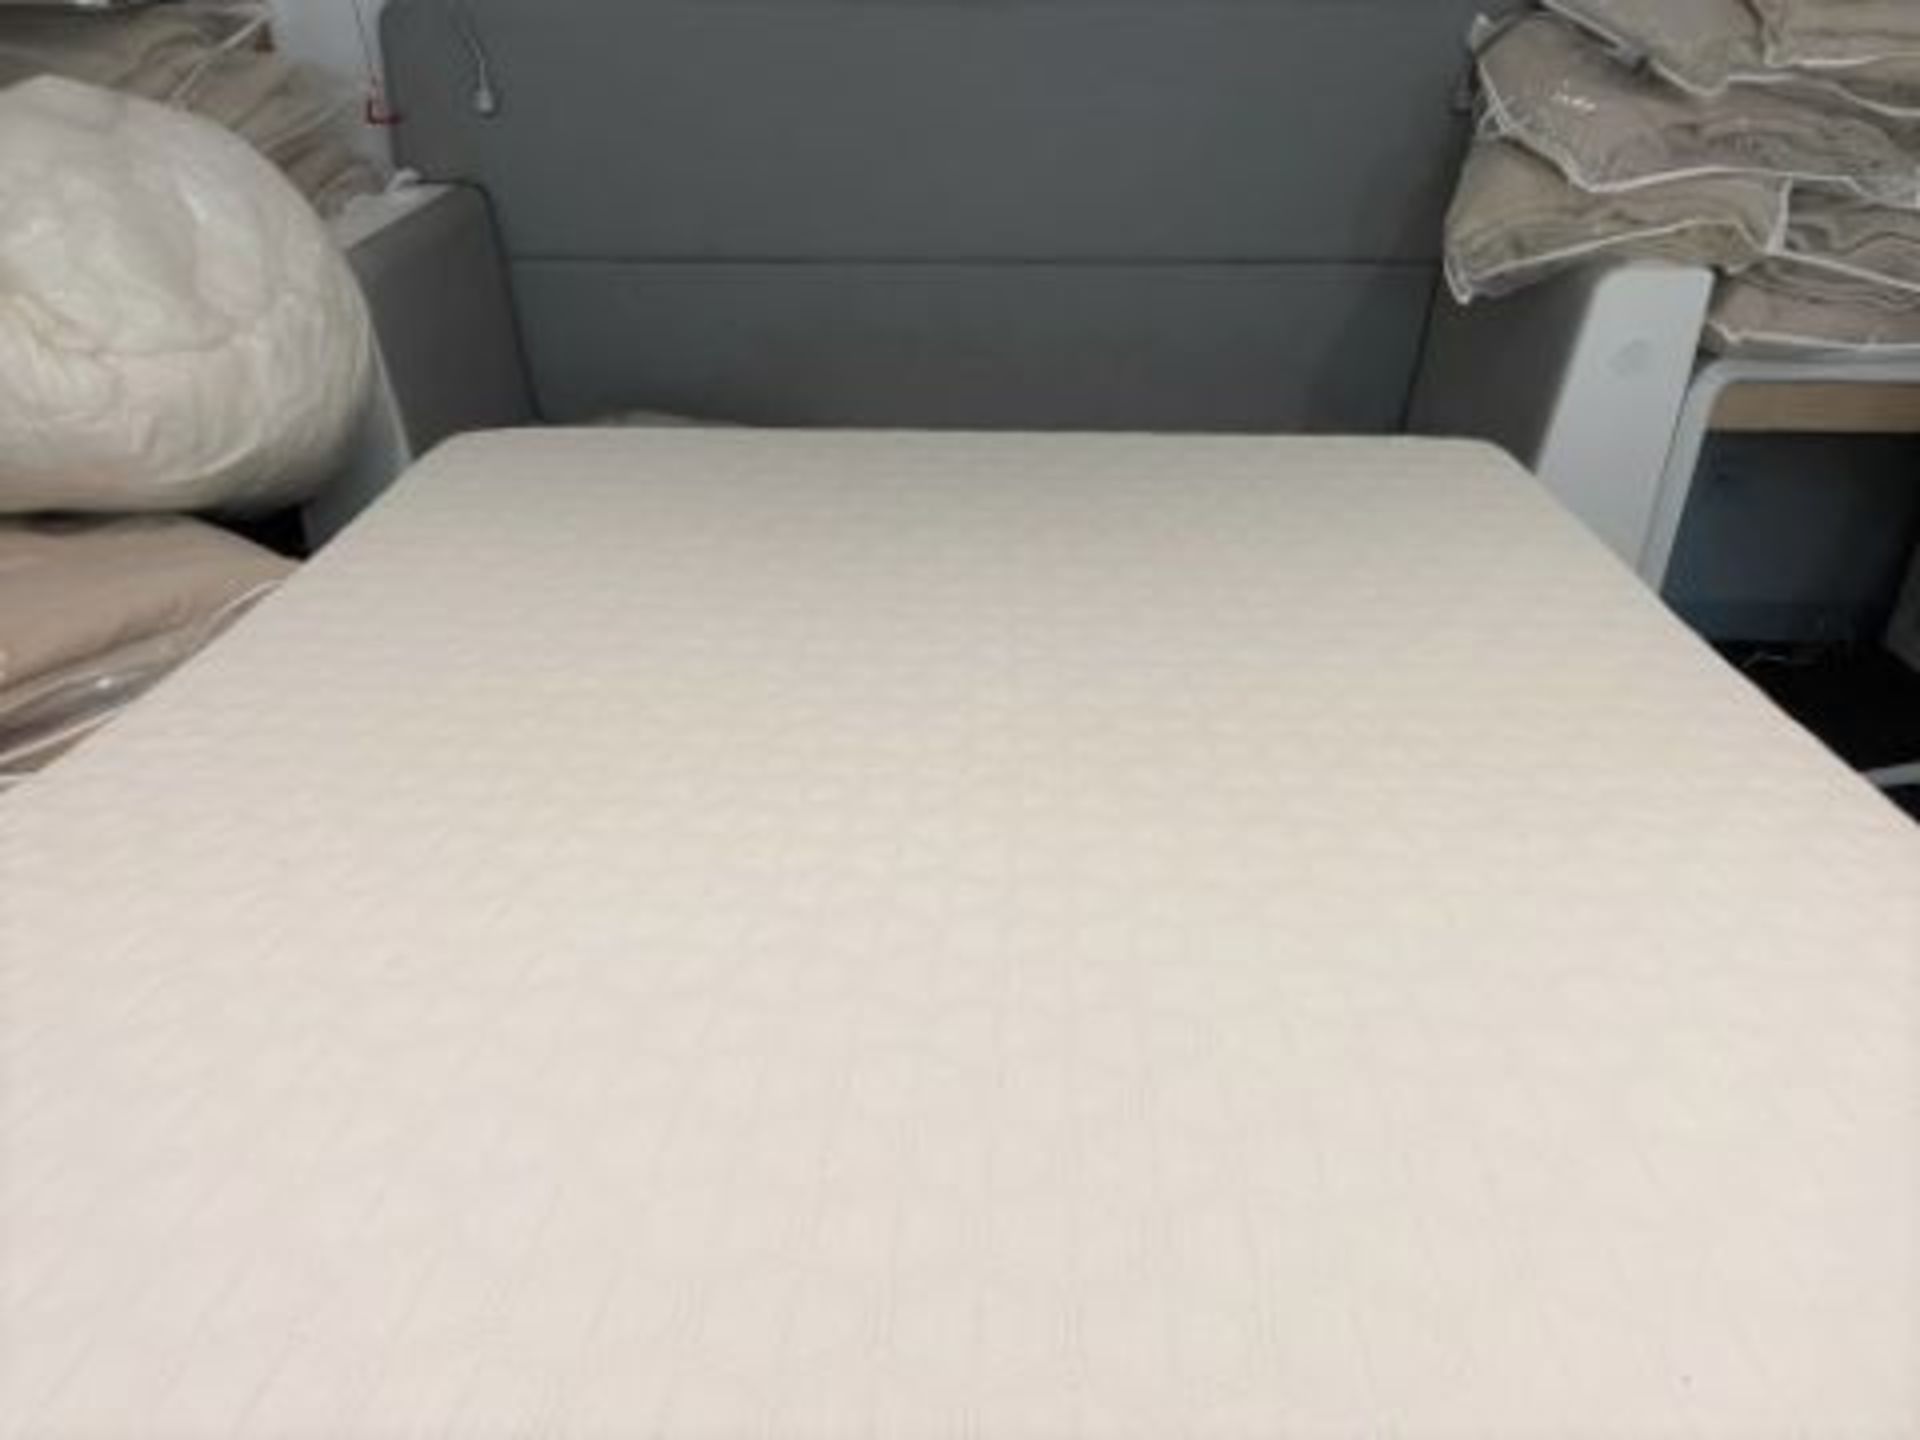 1 x Double Adjustable Space Saving Smart Bed With Serta Motion Memory Foam Mattress - Signature - Image 2 of 8